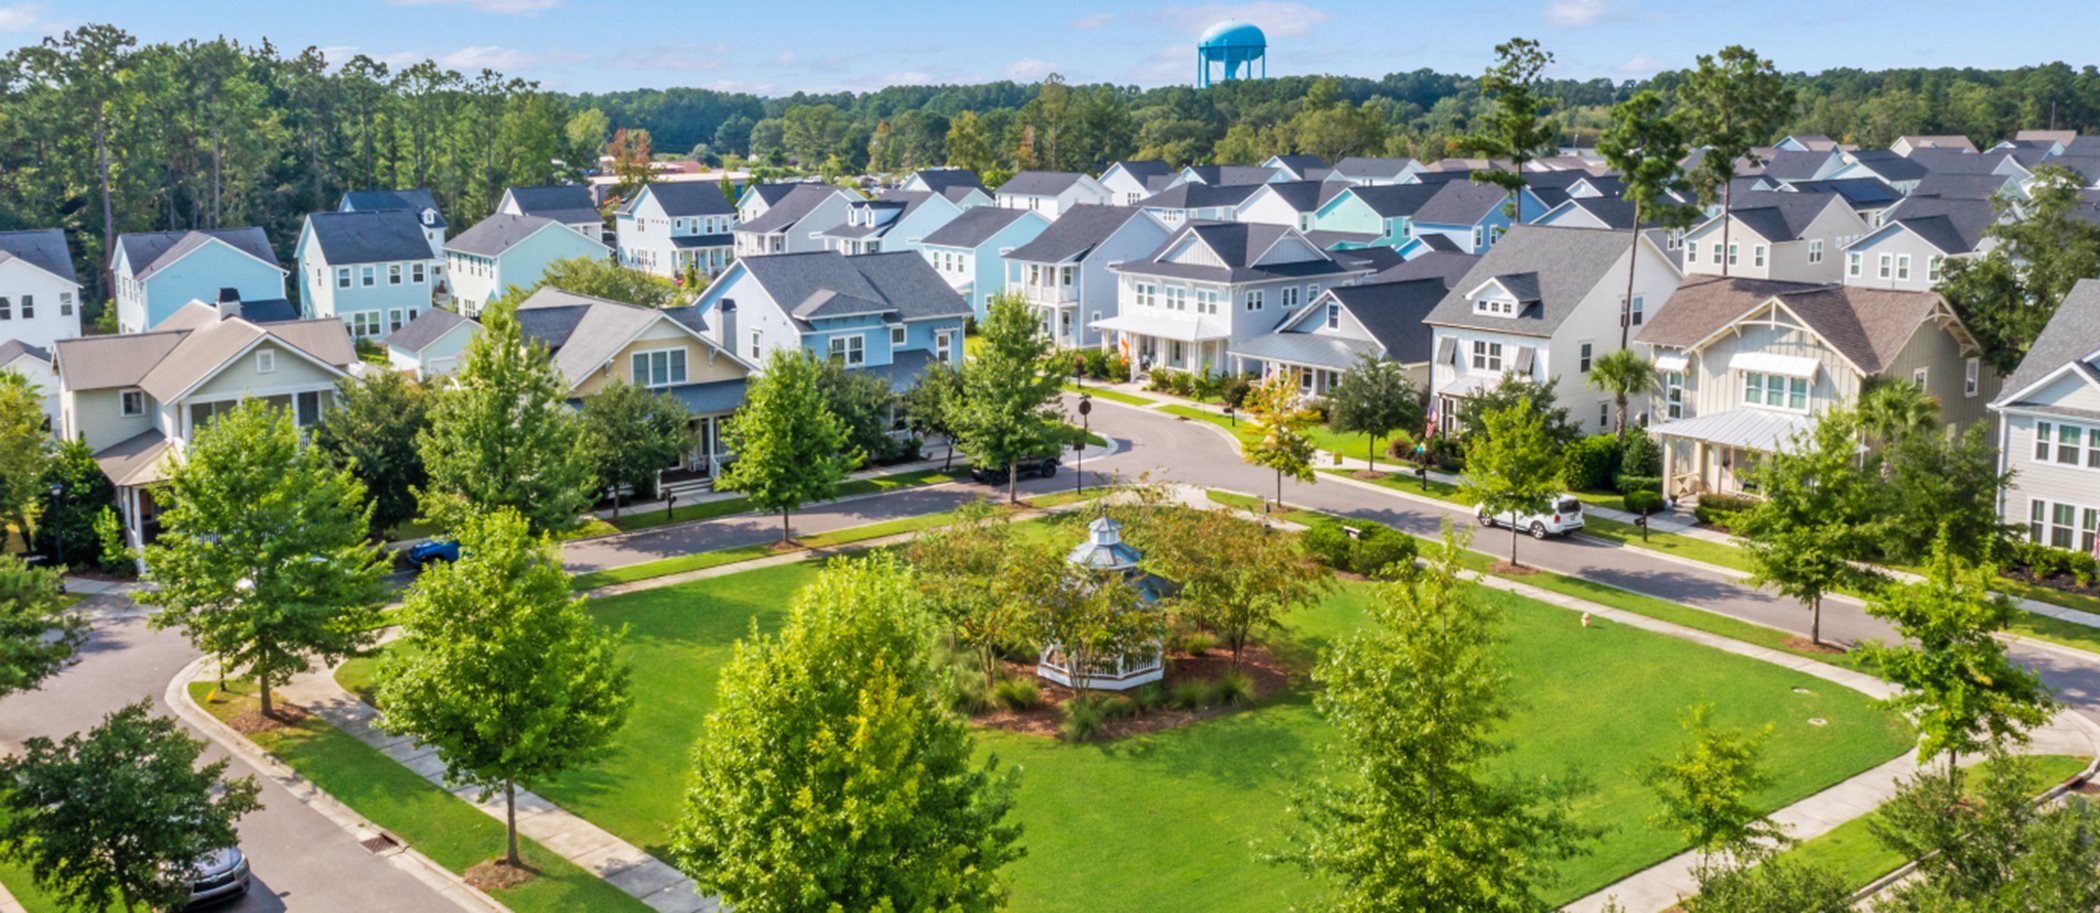 Aerial view of Limehouse Village courtyard and neighborhood